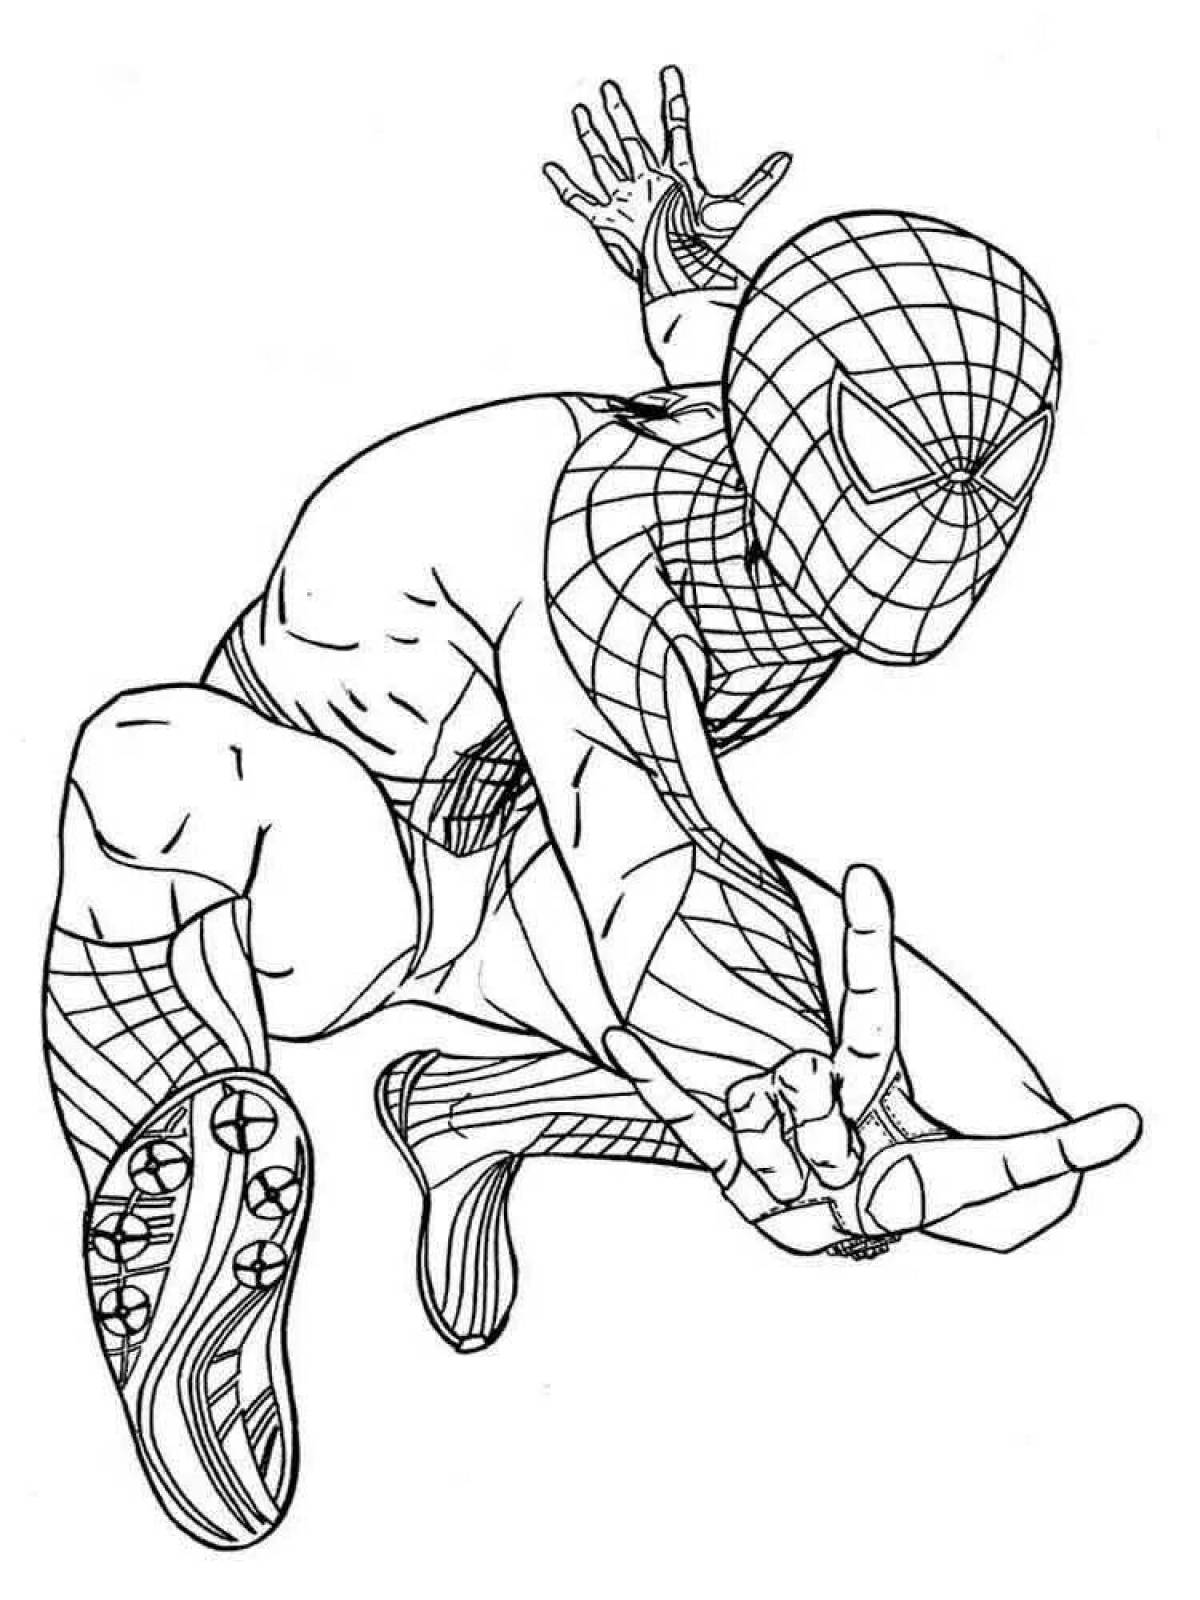 Spiderman gorgeous coloring page